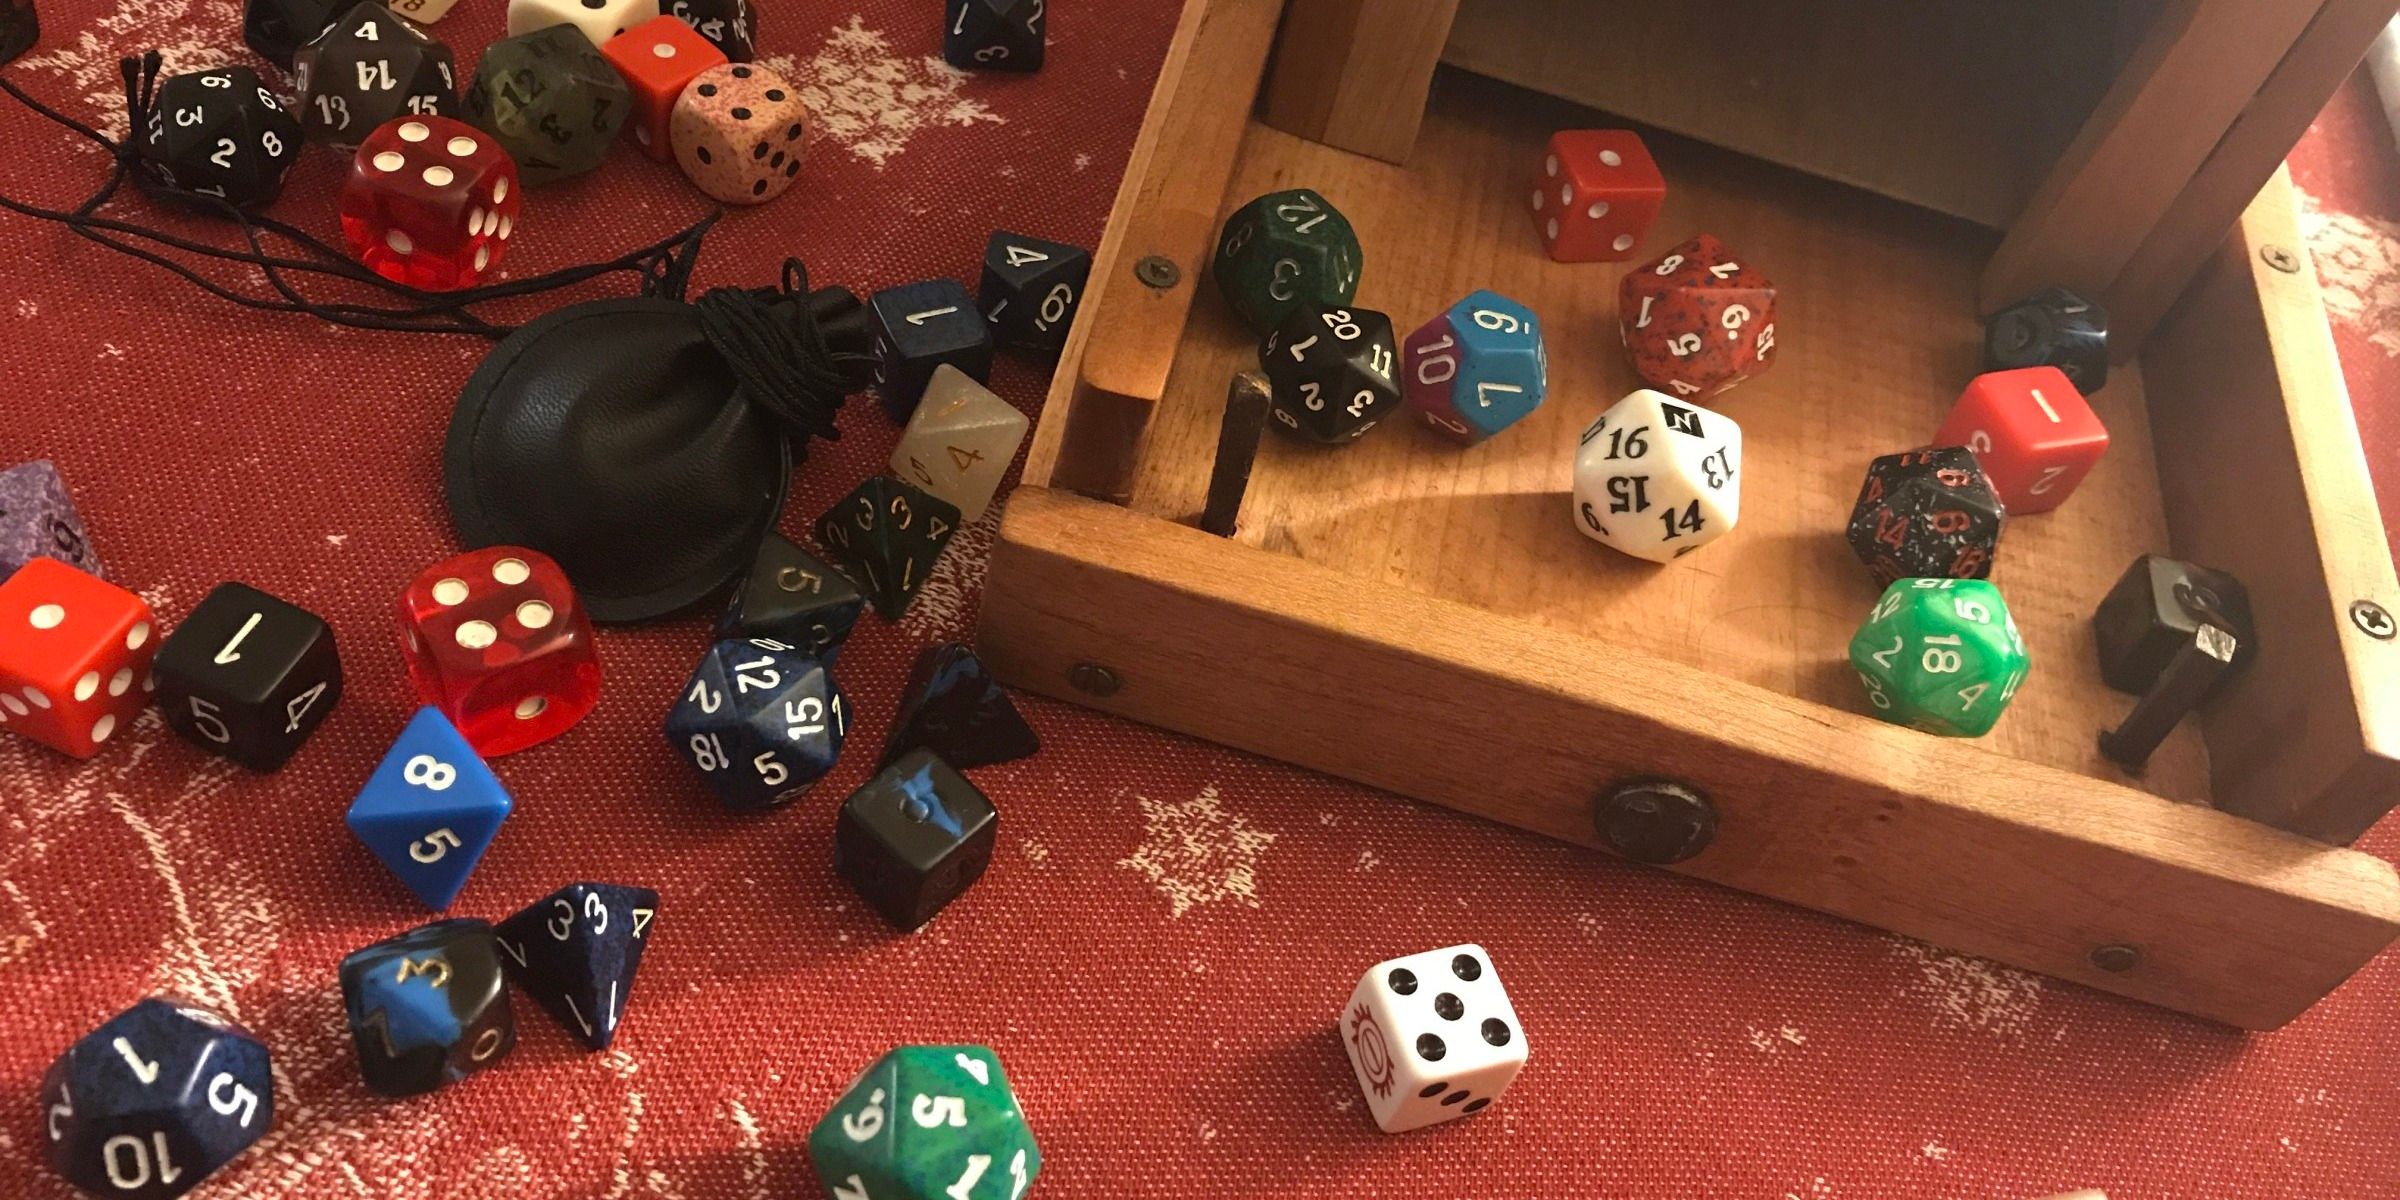 multisided dice of various colors, open wooden box